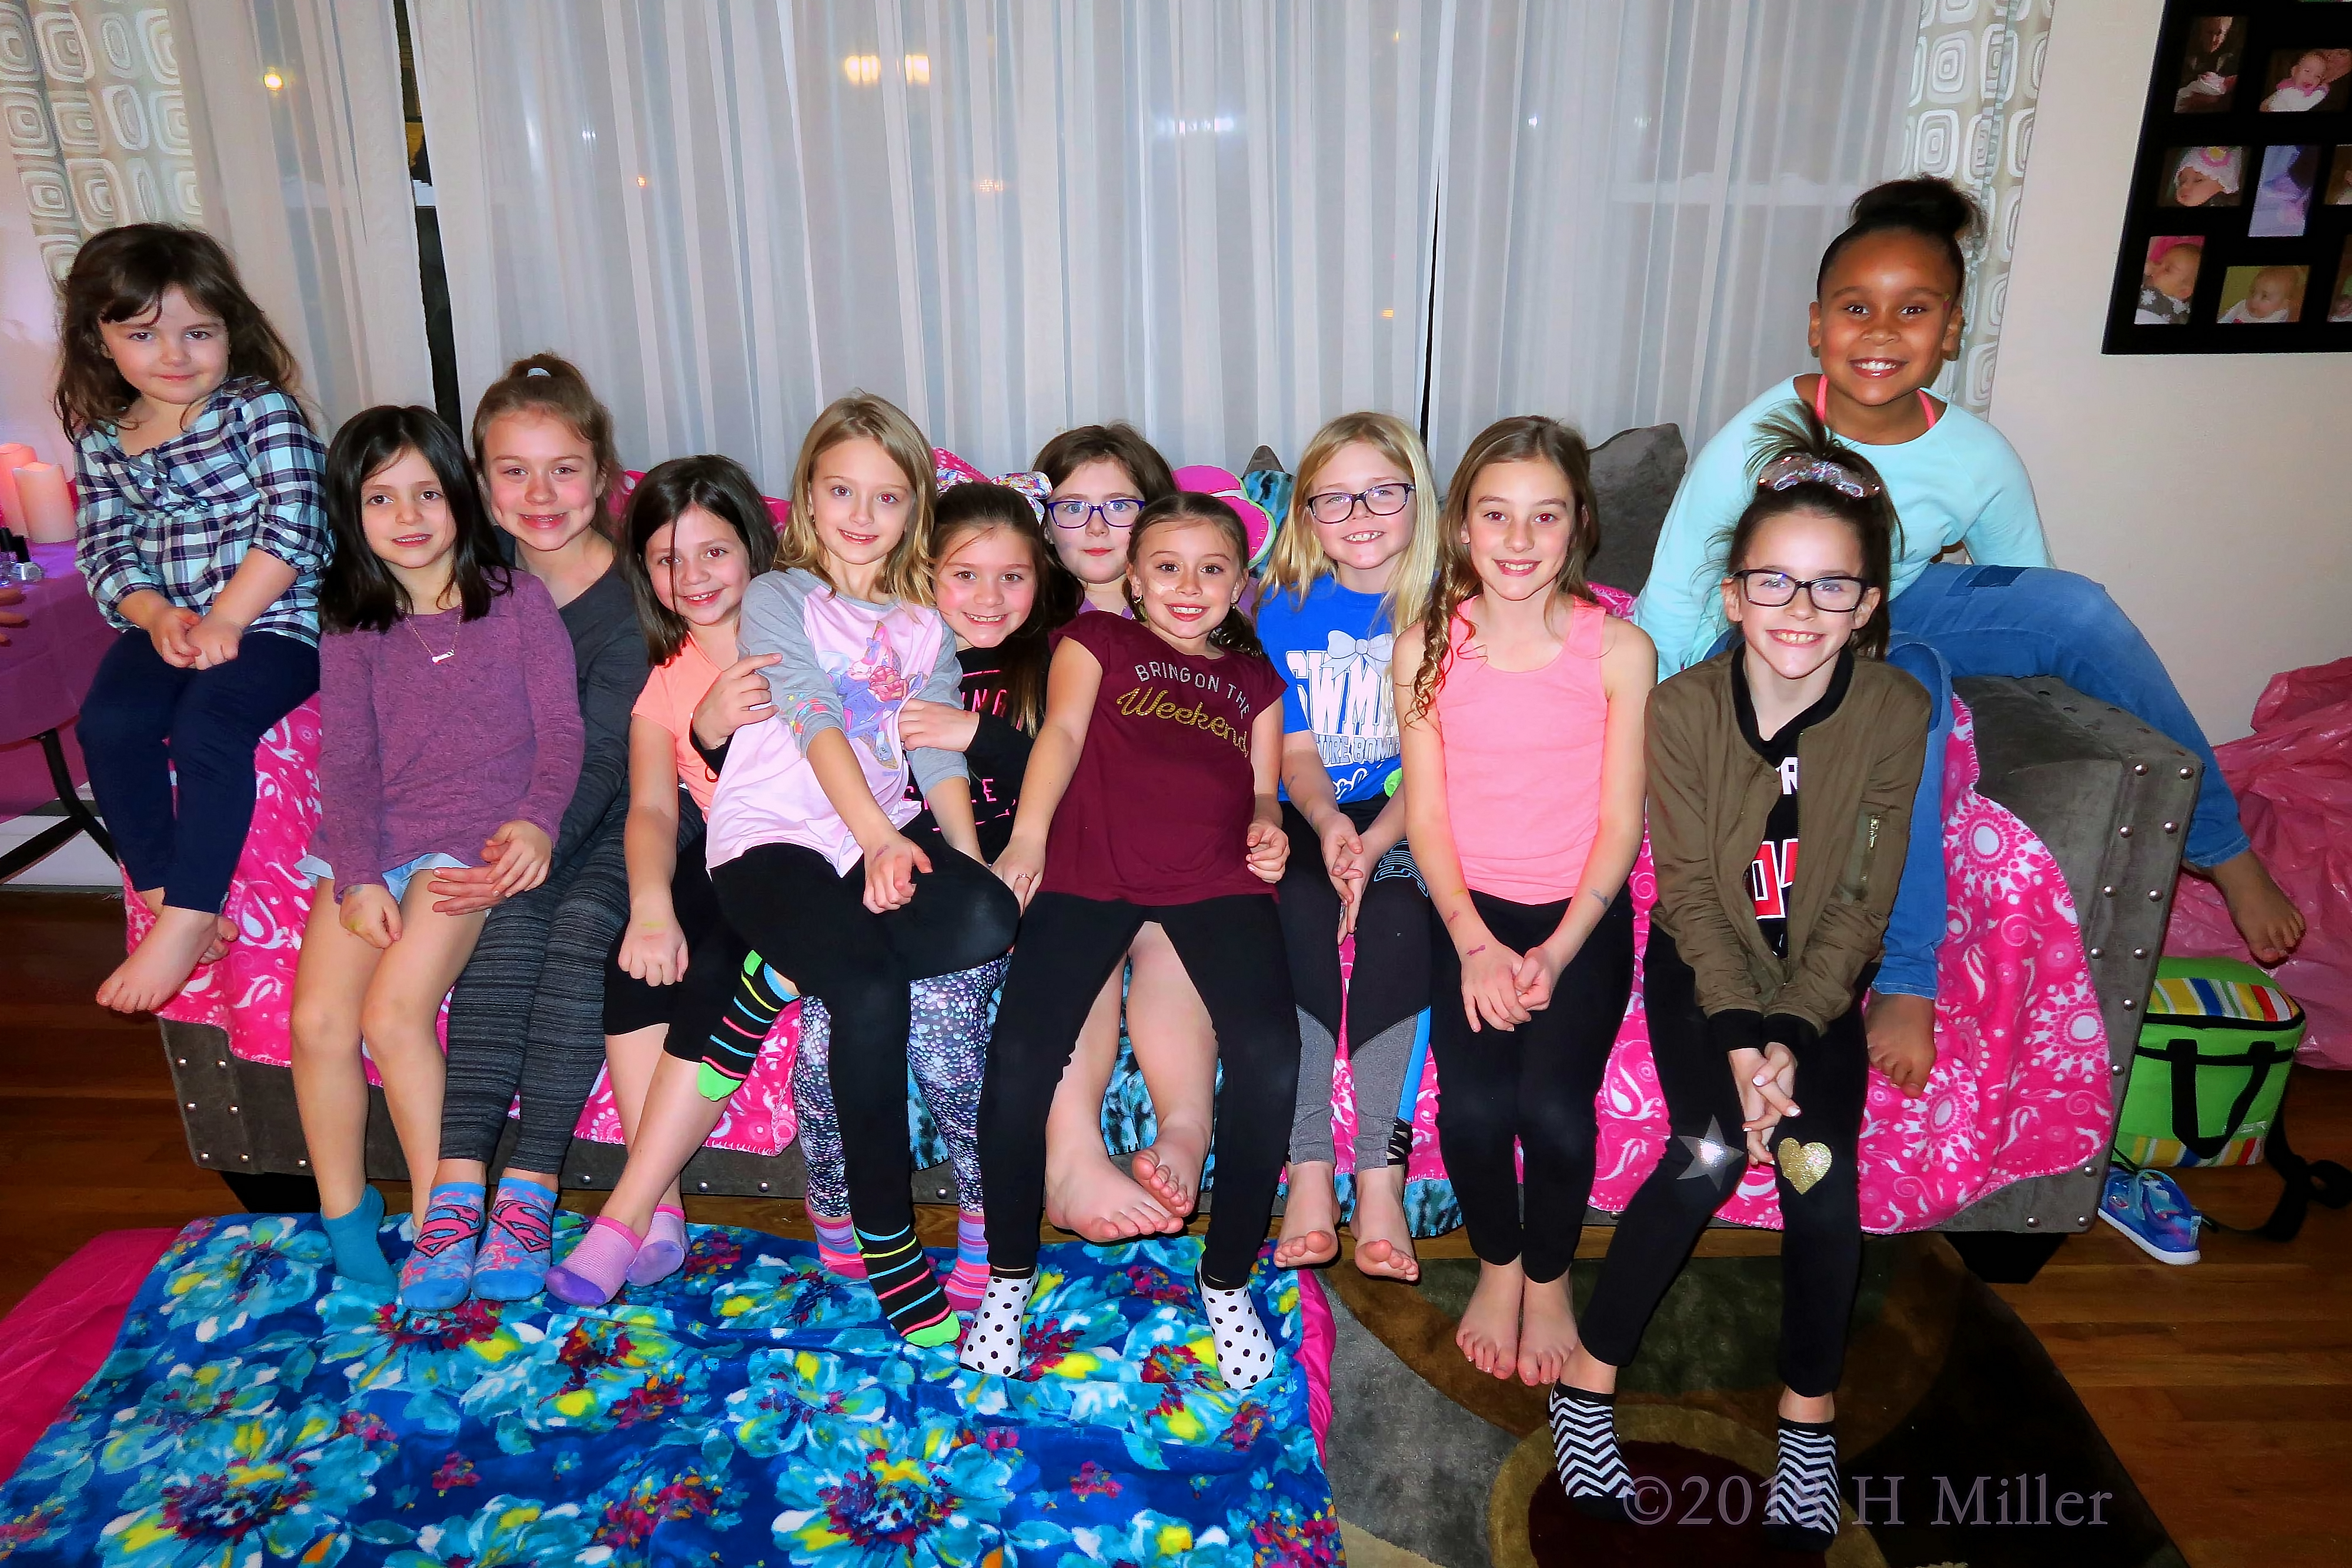 Group Photo Of Kids Spa Party Guests! 